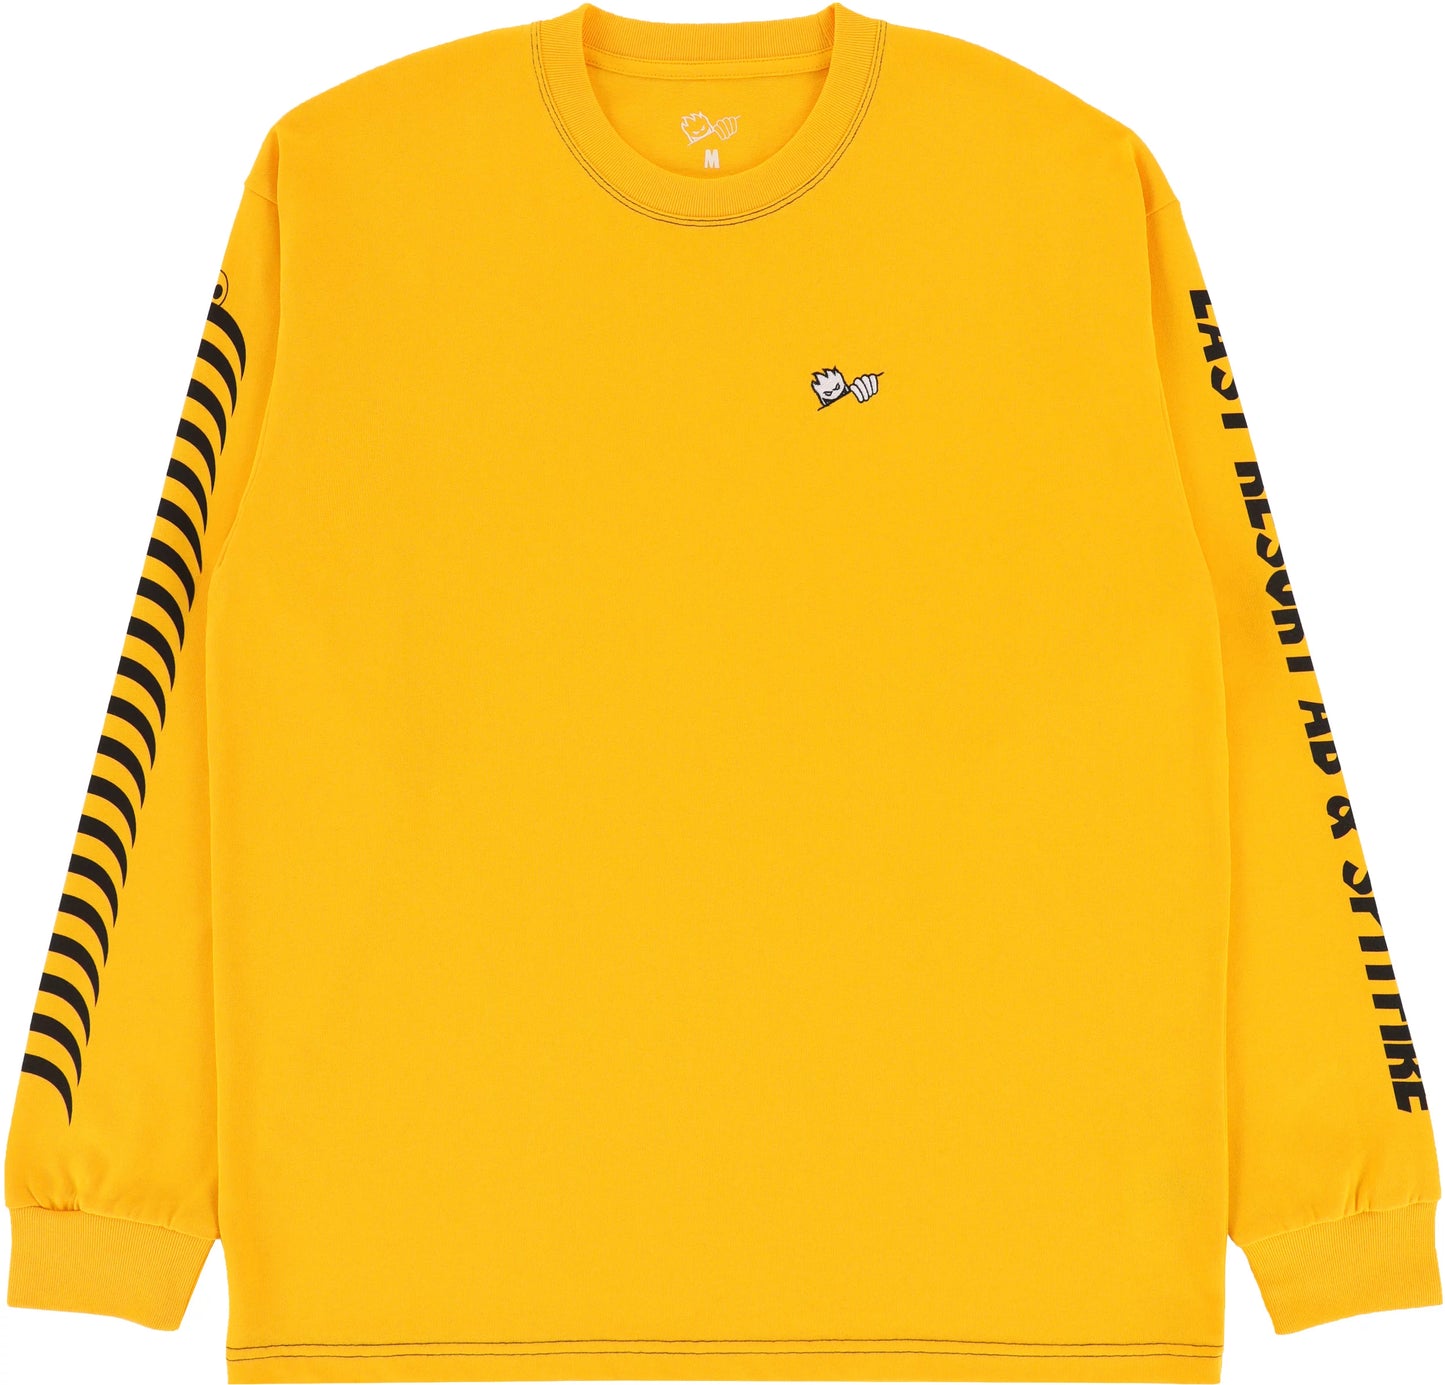 Last Resort AB X Spitfire L/S Tee Shirt Ylw(size options listed)